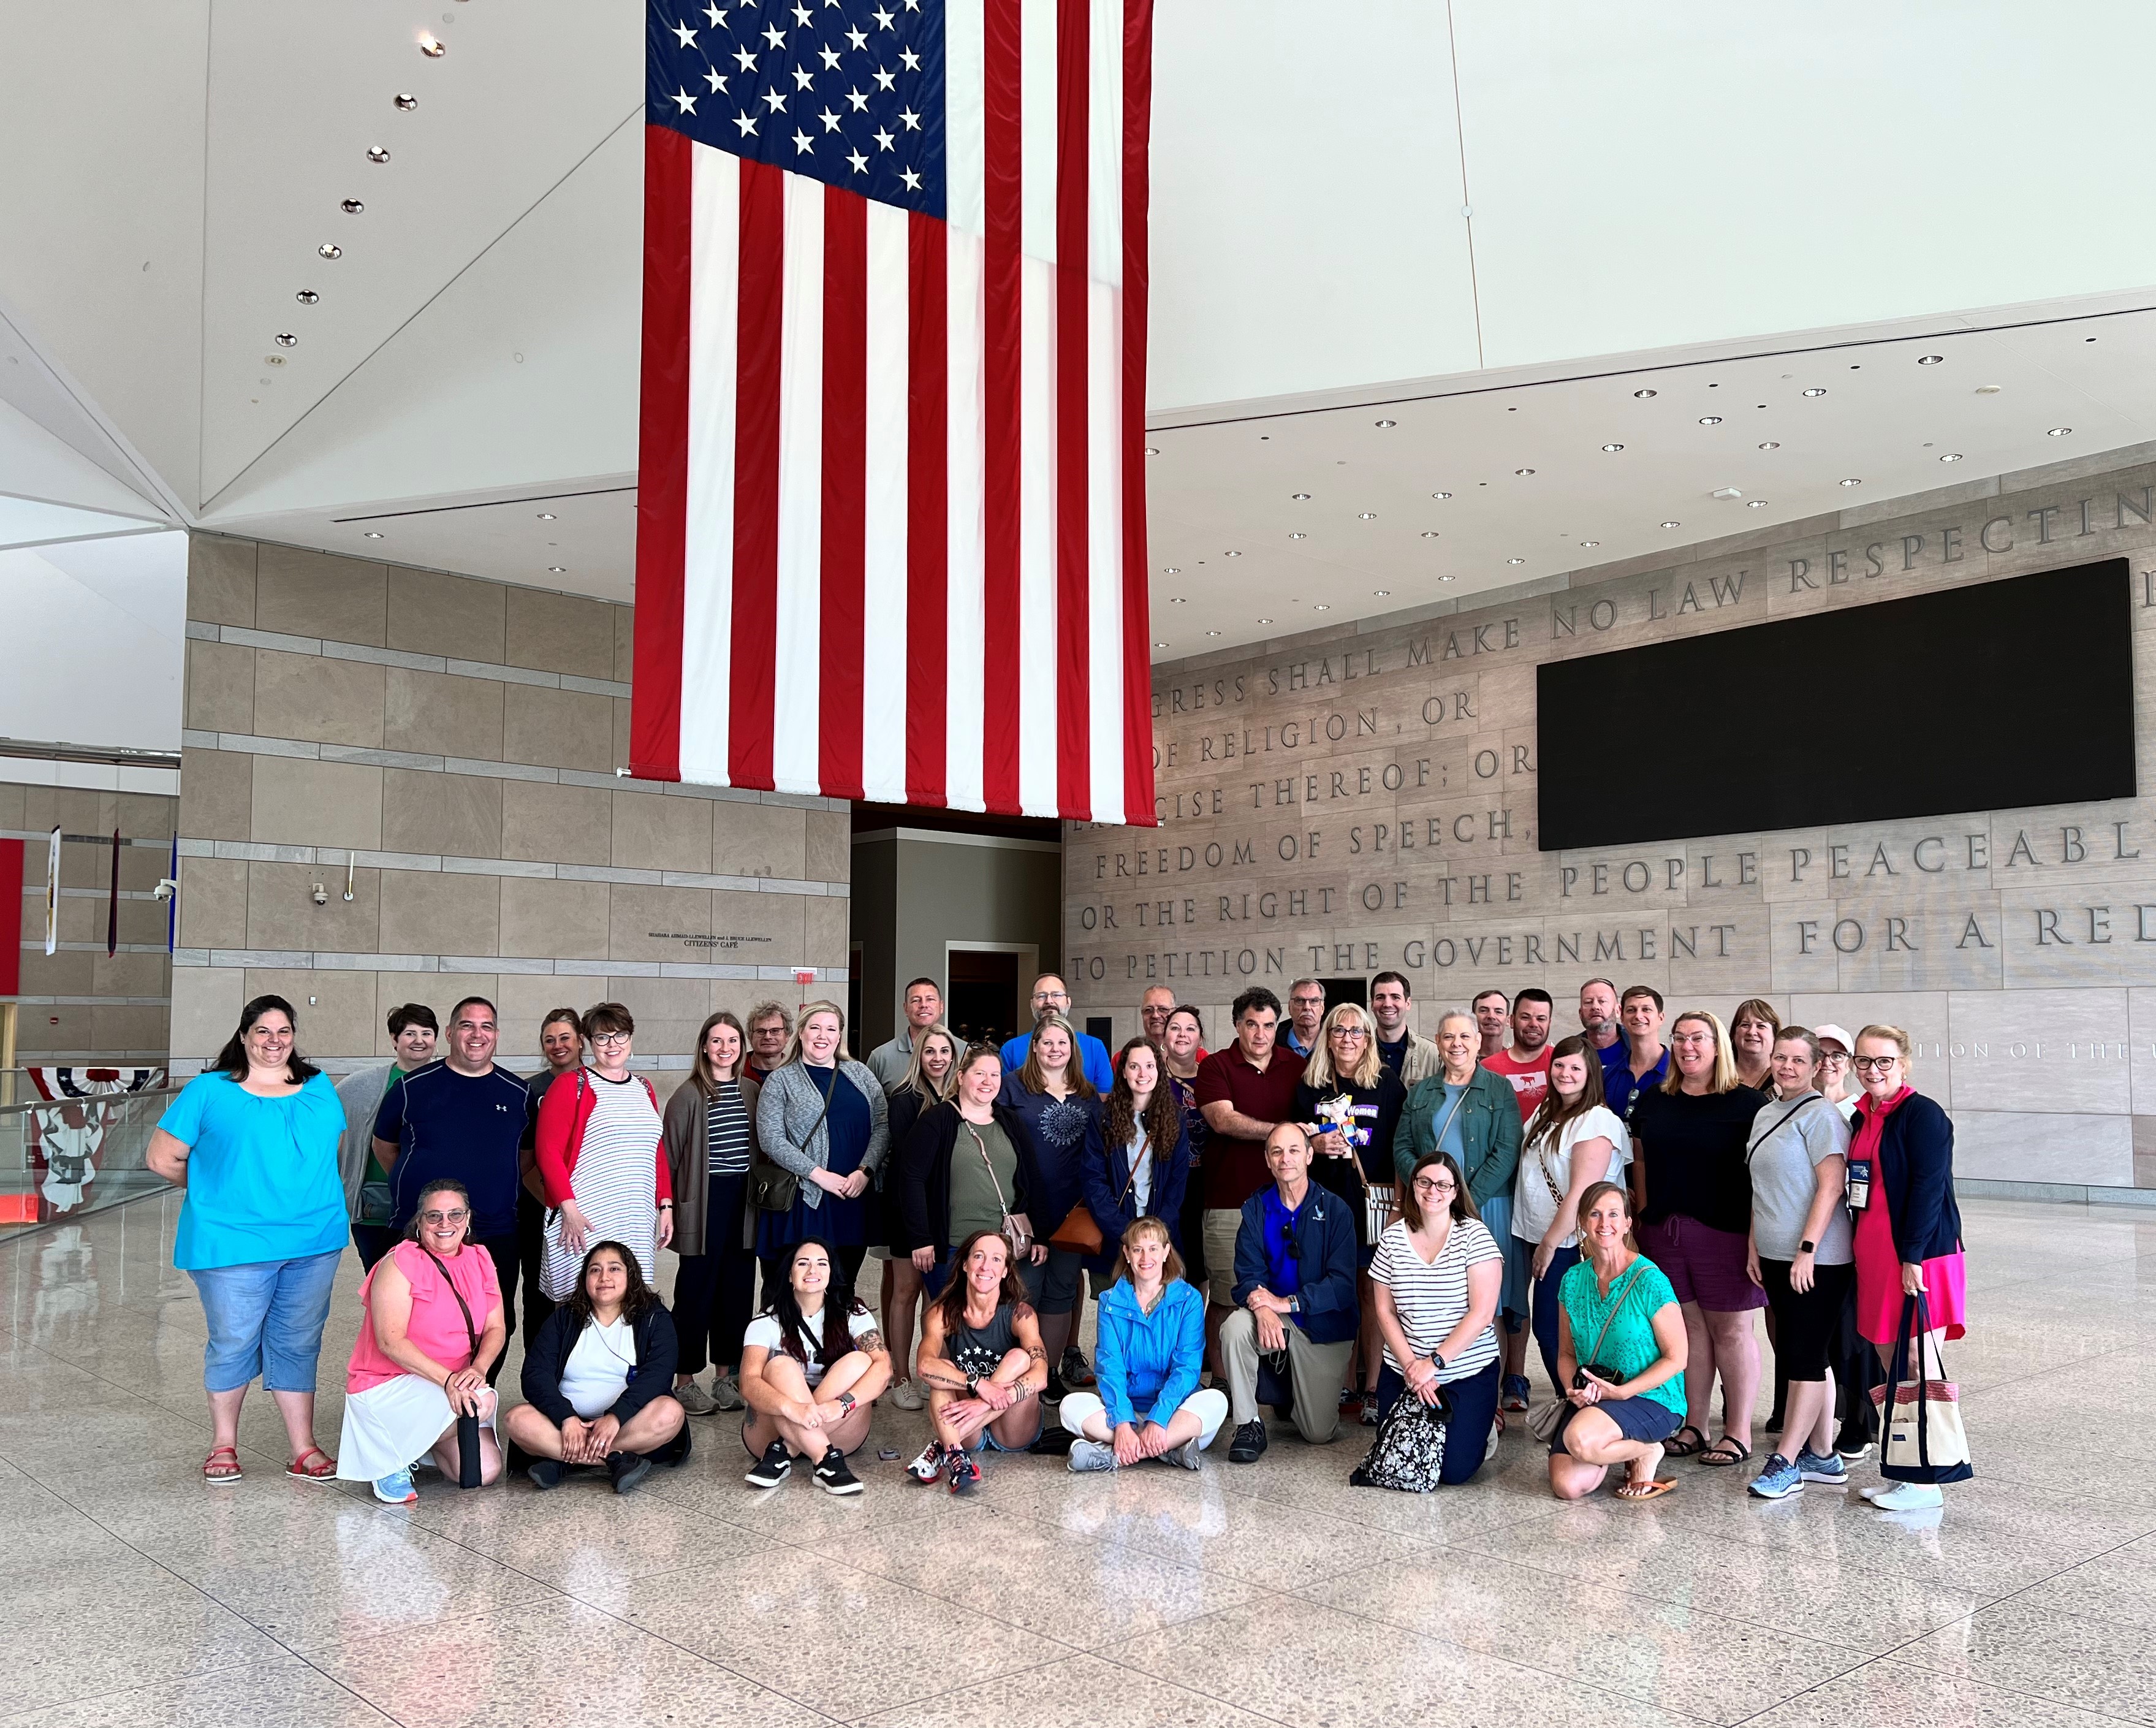 Group shot of adults posing under an American flag handing from a ceiling inside a building.